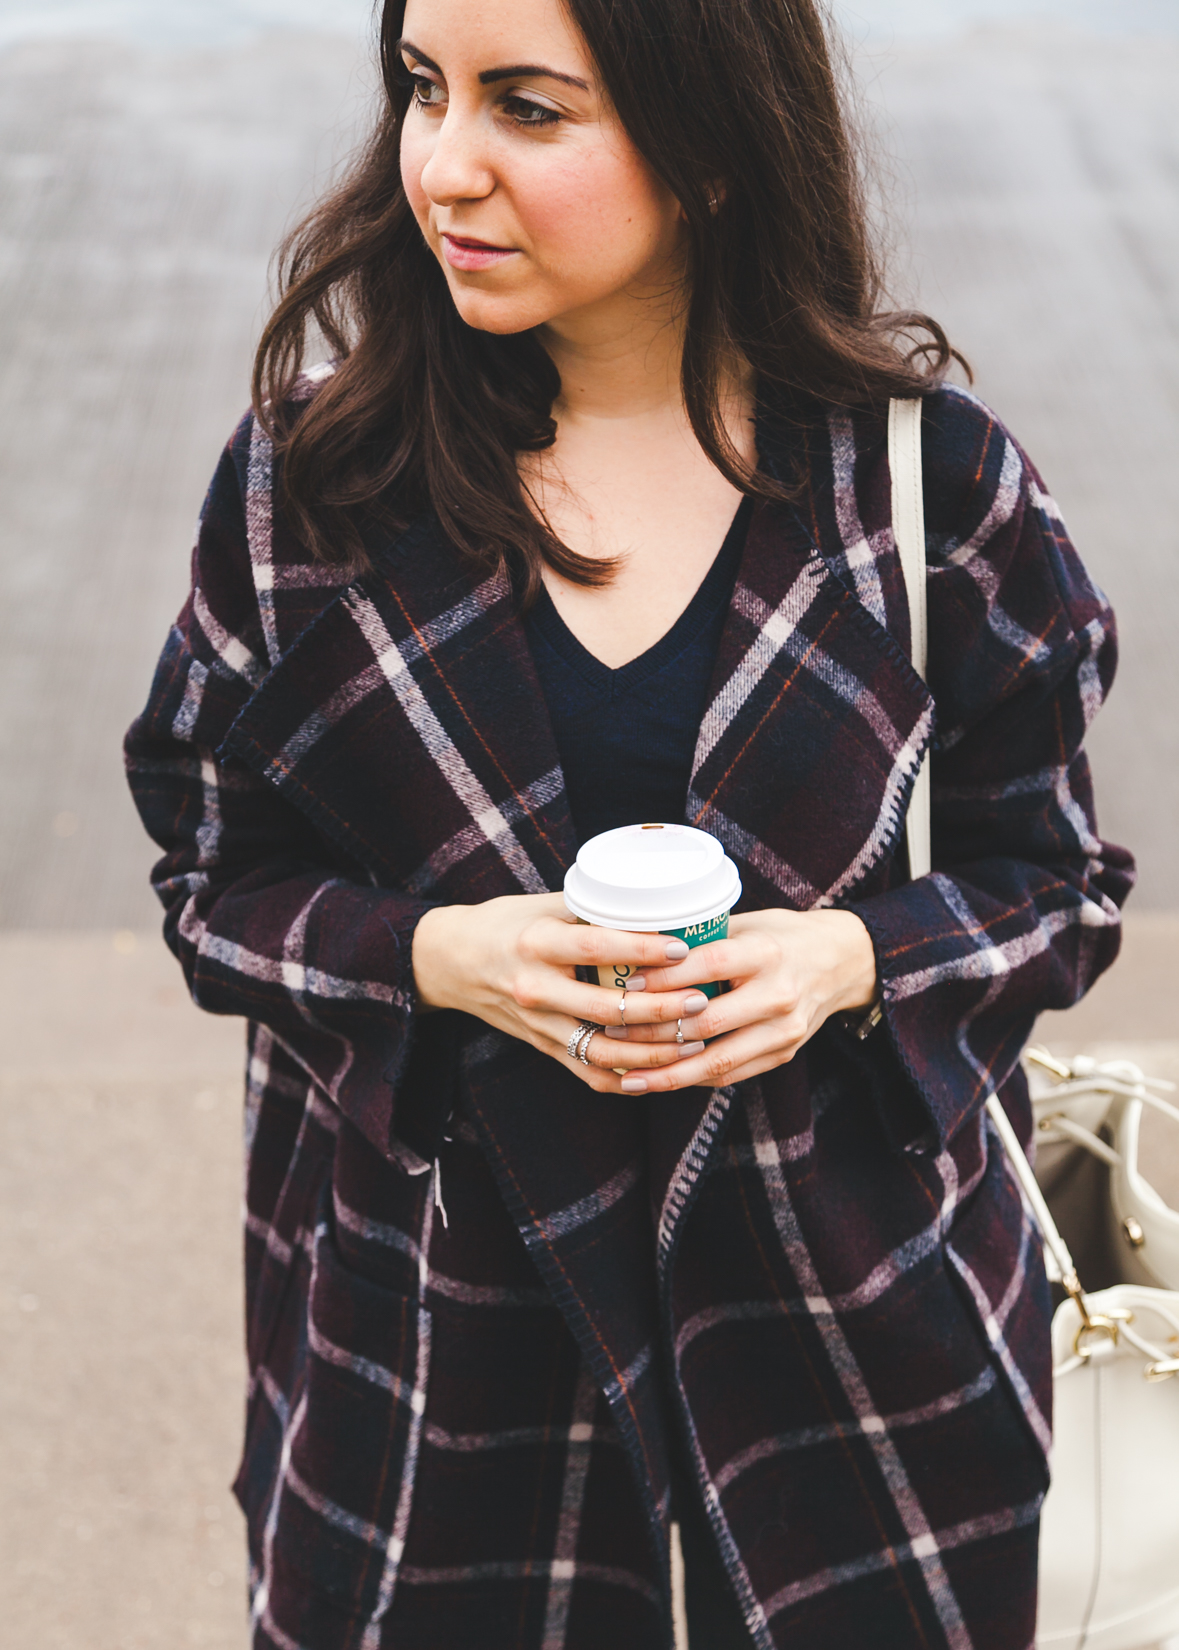 Yana Puaca of NoMad Luxuries wearing a plaid coat from TJ Maxx for the Fall in Chicago